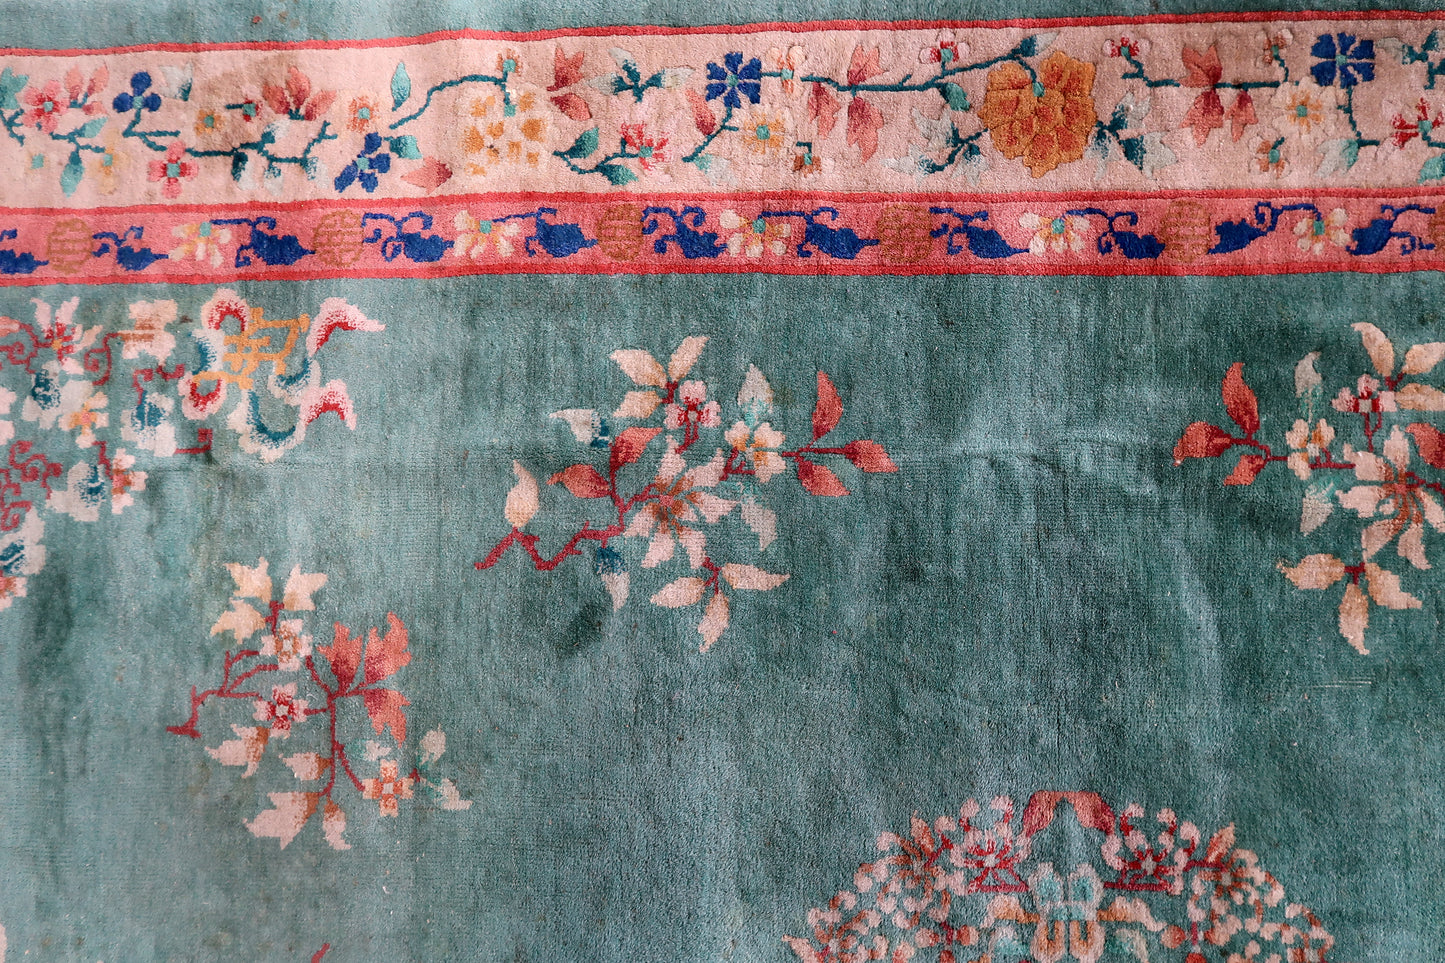 A close look at the rug's fine craftsmanship.